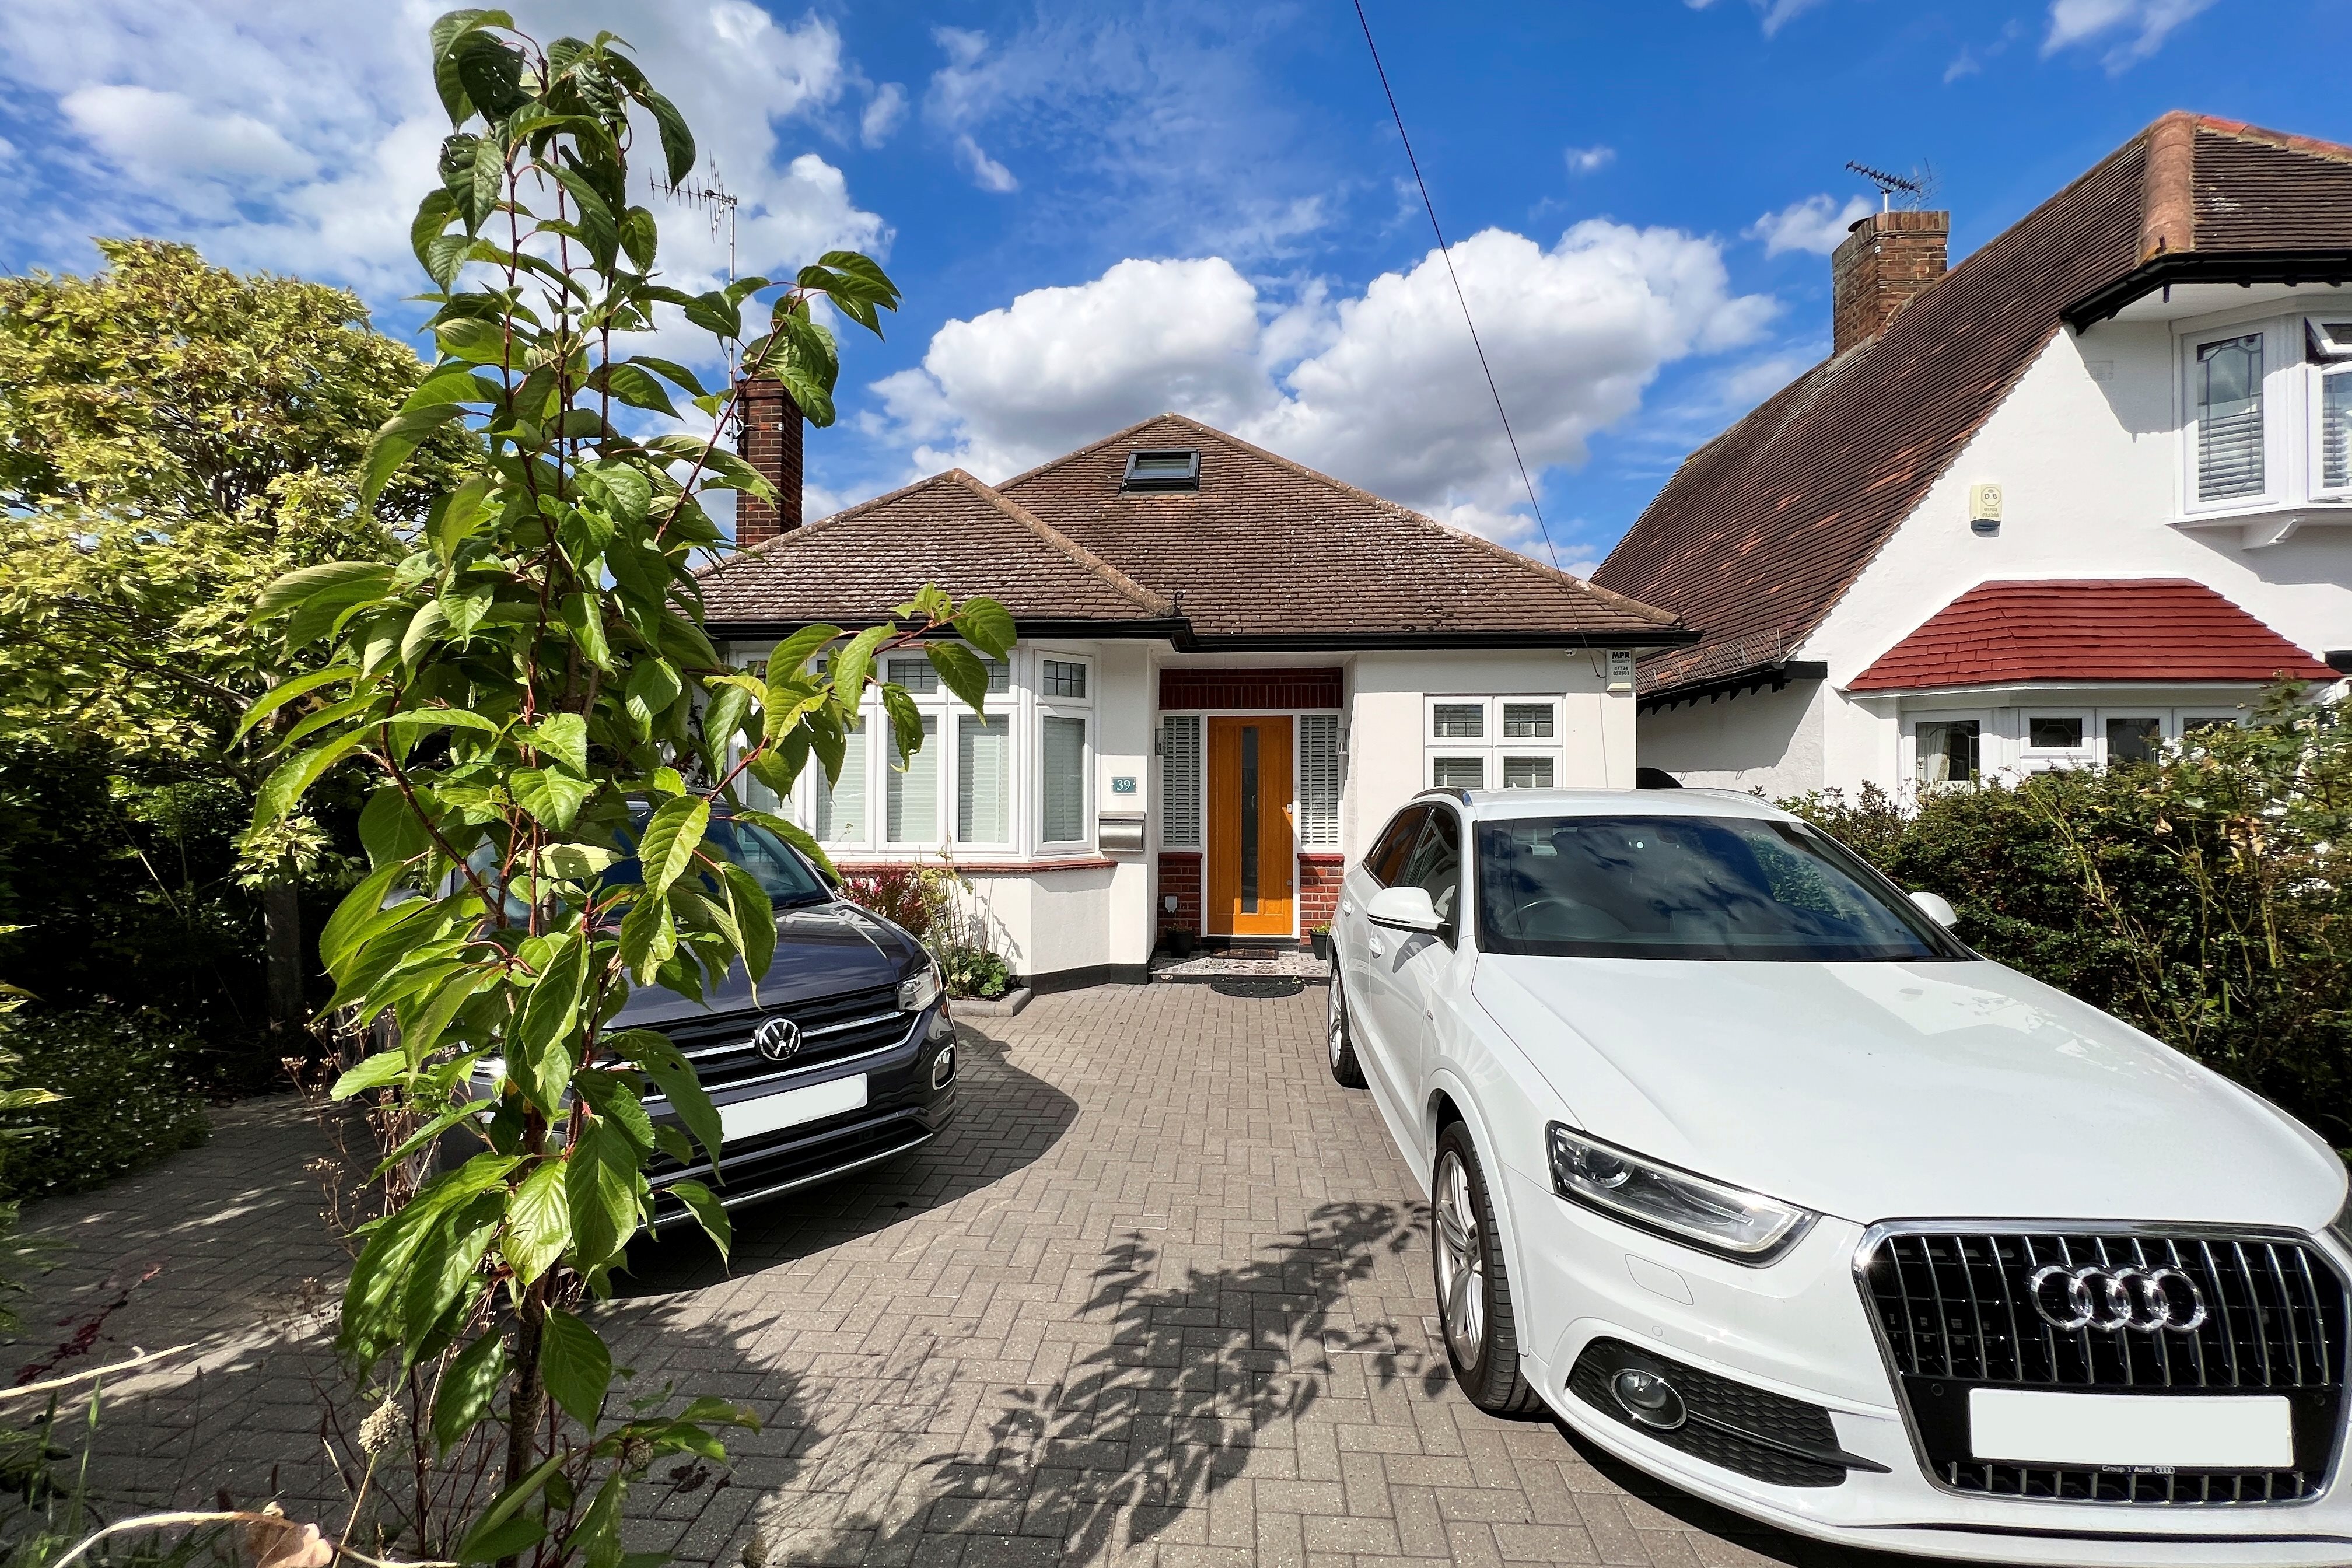 4 bed detached house to rent in Winsford Gardens, Westcliff-on-Sea - Property Image 1